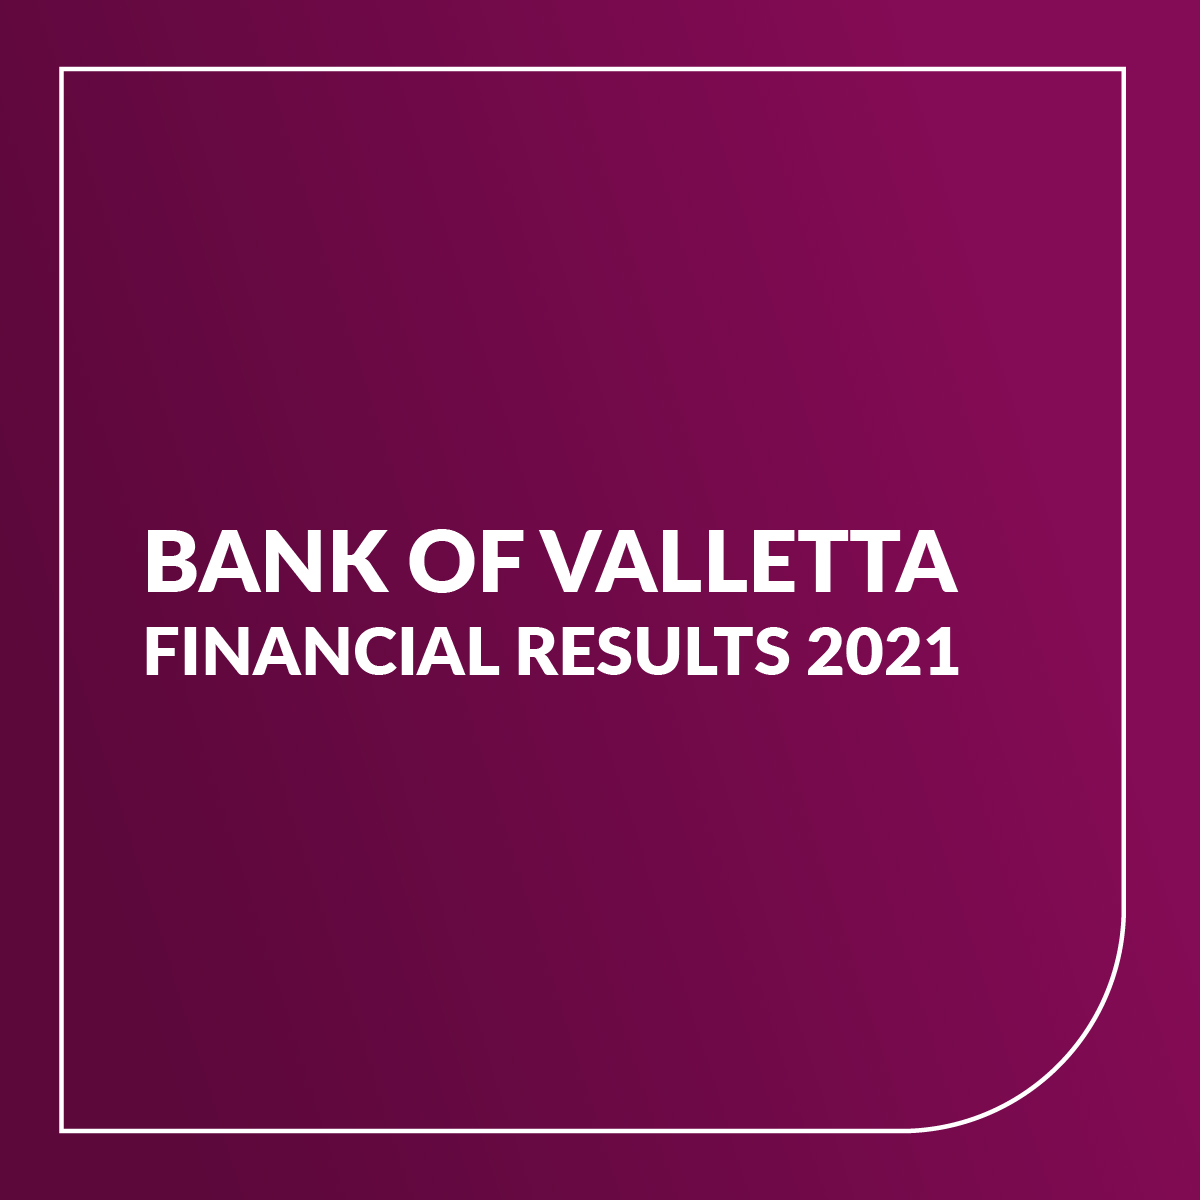 BOV announces strong 2021 financial results despite challenges